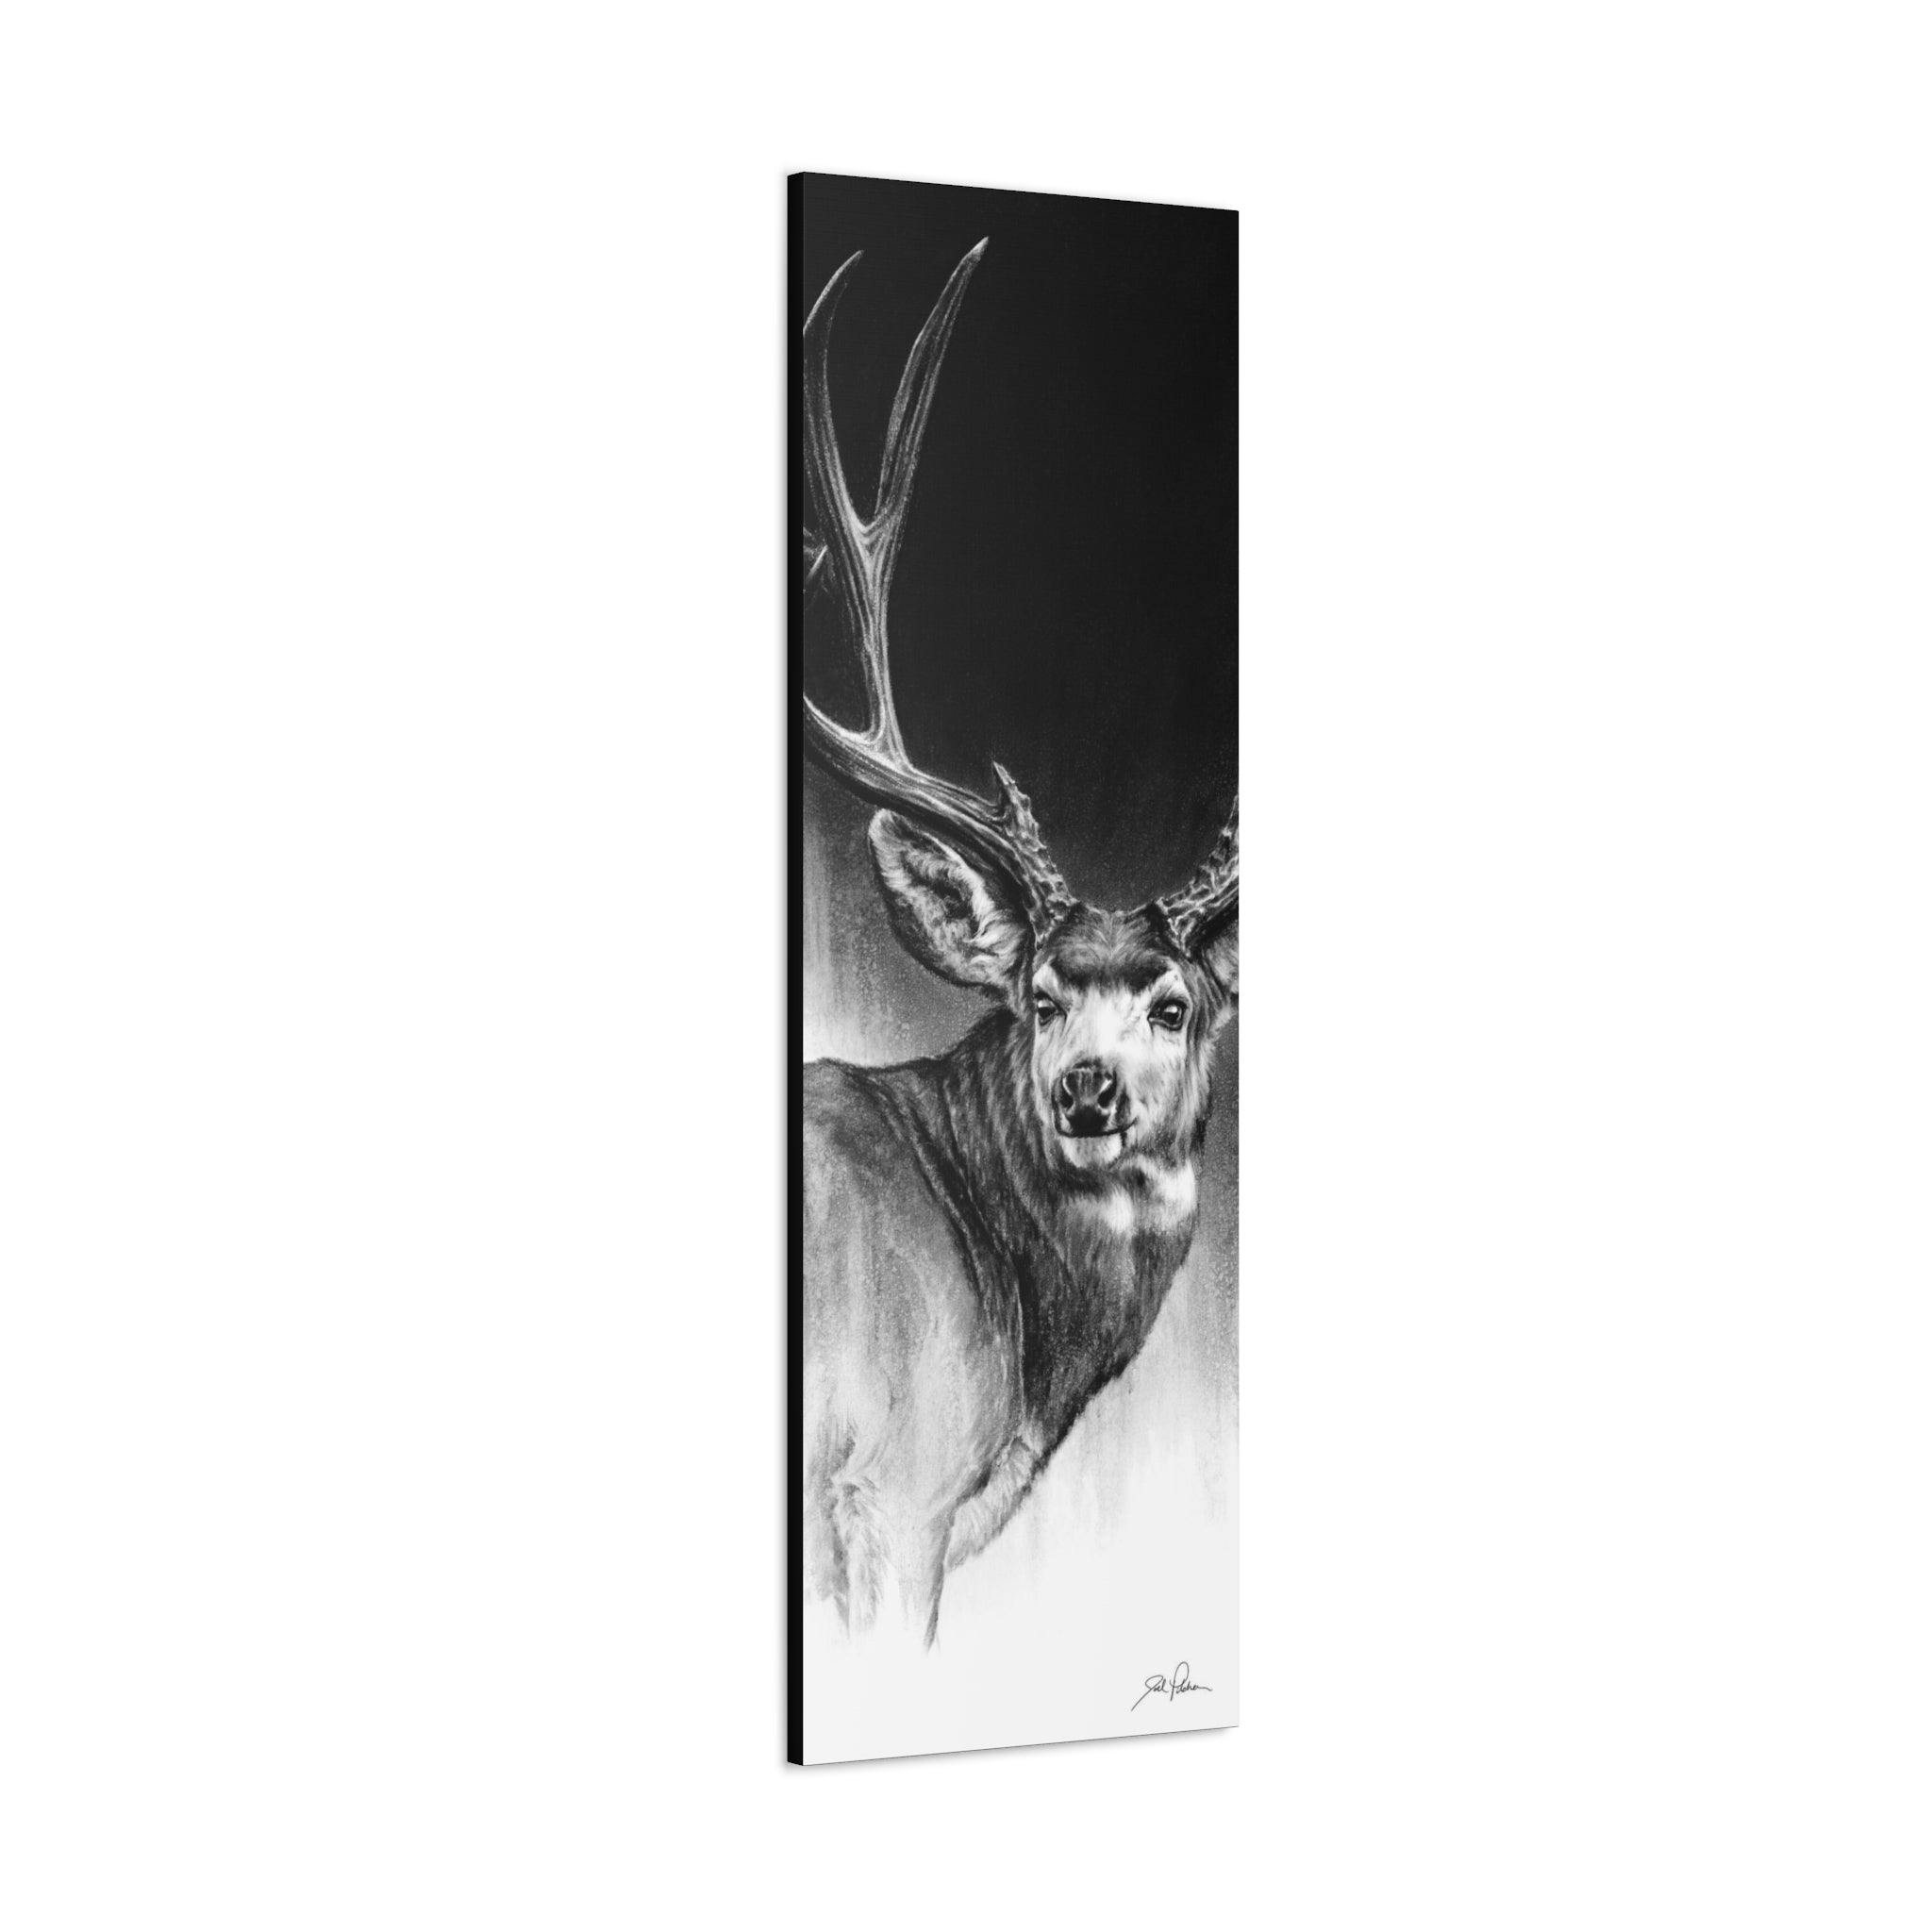 "Looking Back" 20x60 Gallery Wrapped Canvas